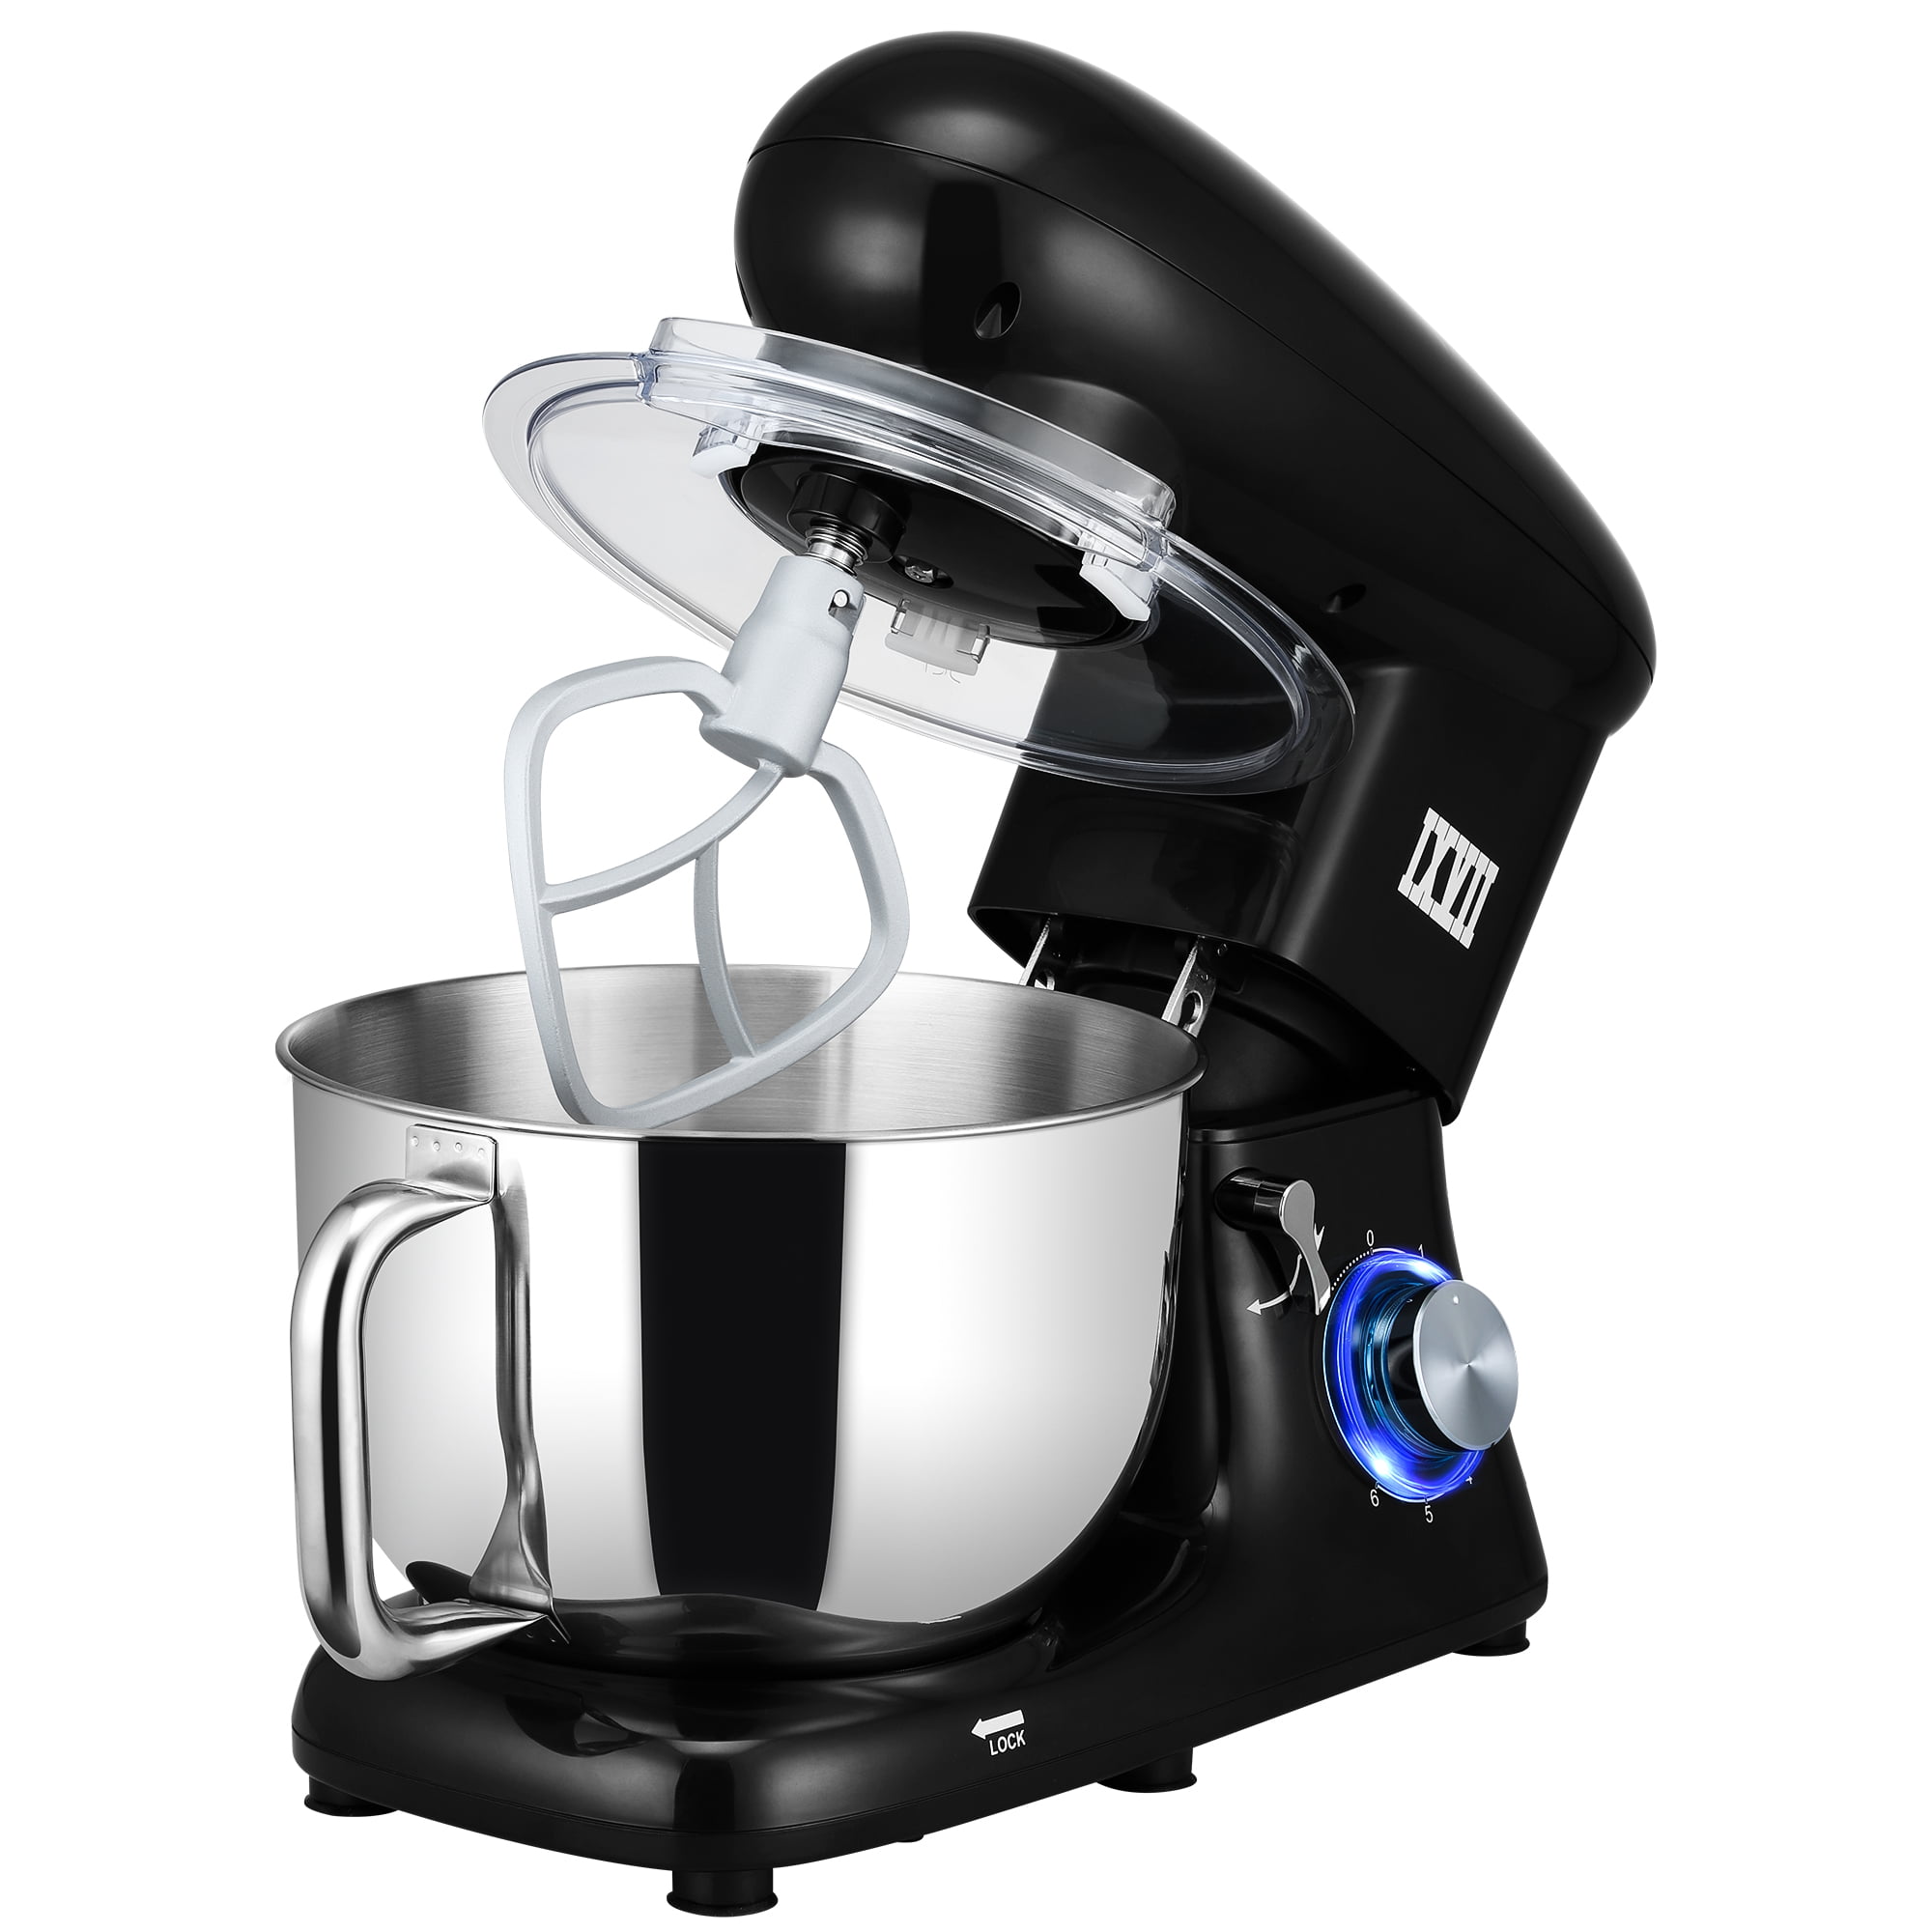 Whall Black Kinfai Electric Kitchen Stand Mixer Machine with 4.5 Quart Bowl  for Baking, Dough, Cooking, Black